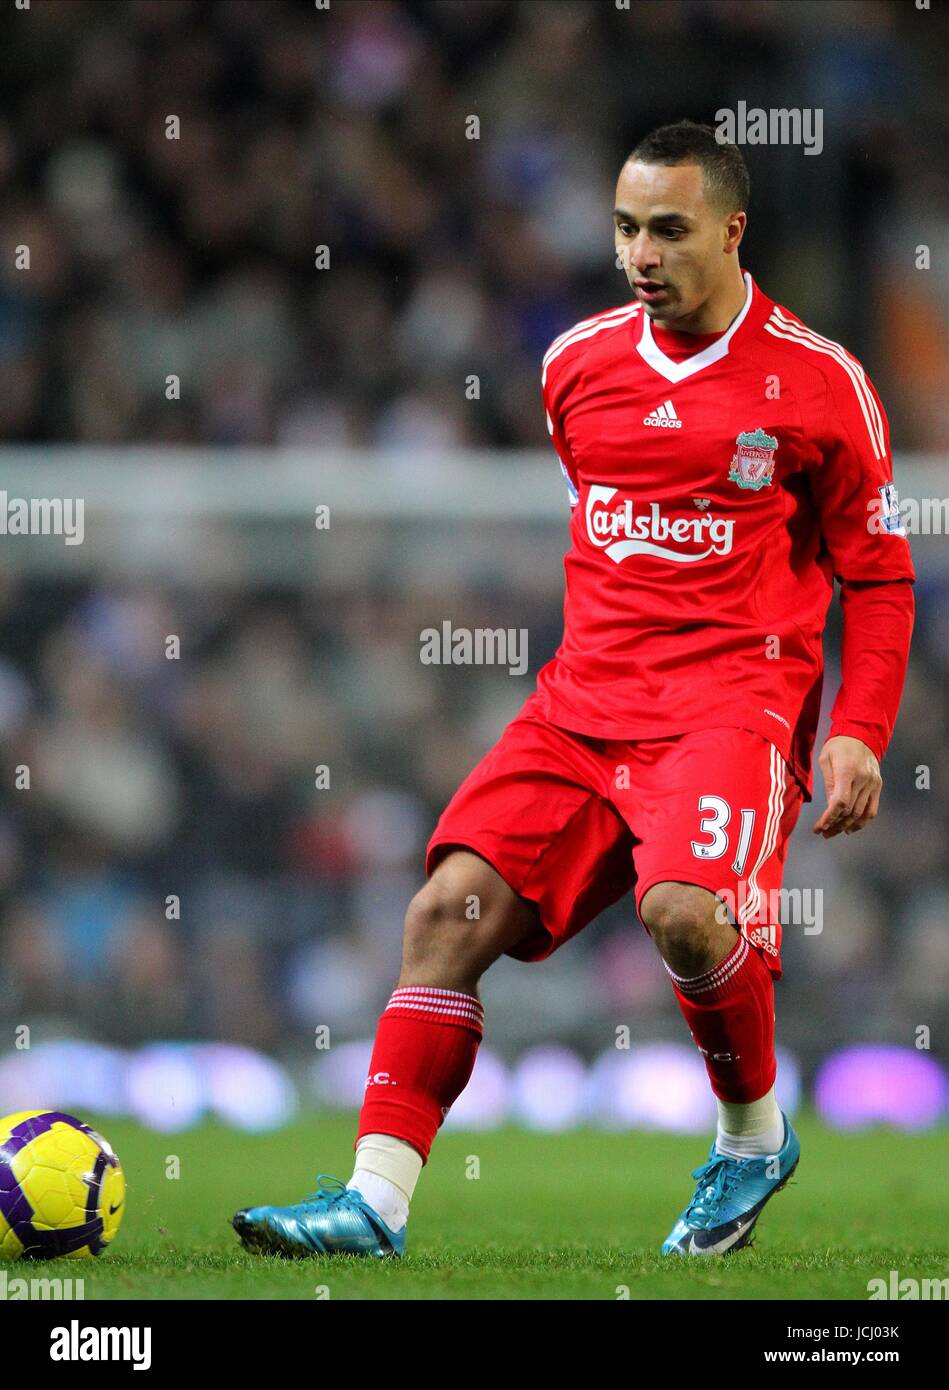 NABIL EL ZHAR LIVERPOOL FC BLACKBURN ROVERS V LIVERPOOL,BARCLAYS PREMIERSHIP EWOOD PARK, BLACKBURN, ENGLAND 05 December 2009 GAB5744     WARNING! This Photograph May Only Be Used For Newspaper And/Or Magazine Editorial Purposes. May Not Be Used For, Internet/Online Usage Nor For Publications Involving 1 player, 1 Club Or 1 Competition, Without Written Authorisation From Football DataCo Ltd. For Any Queries, Please Contact Football DataCo Ltd on +44 (0) 207 864 9121 Stock Photo